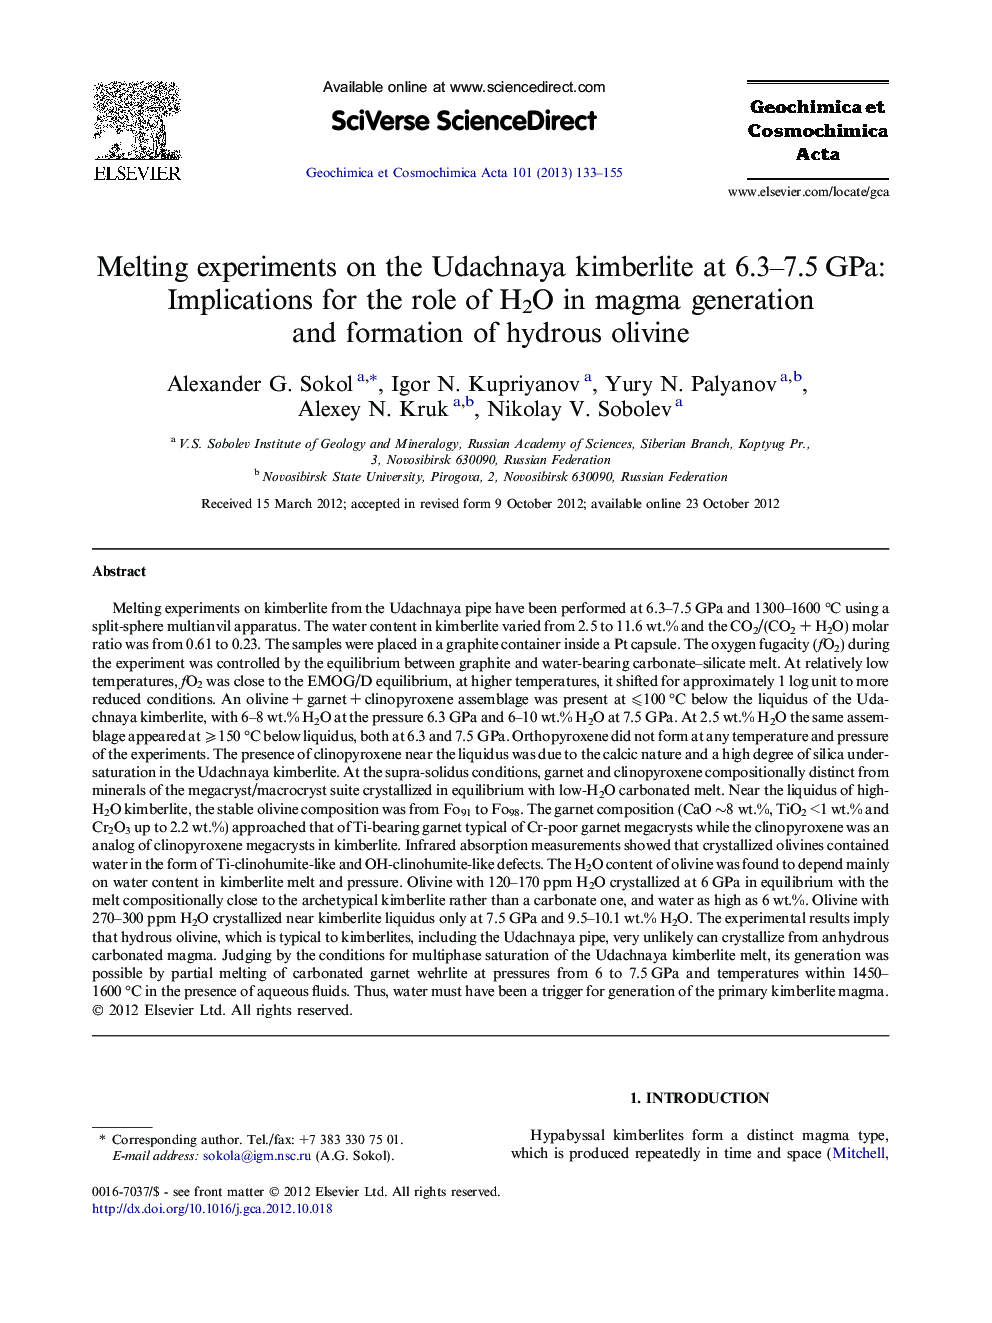 Melting experiments on the Udachnaya kimberlite at 6.3–7.5 GPa: Implications for the role of H2O in magma generation and formation of hydrous olivine